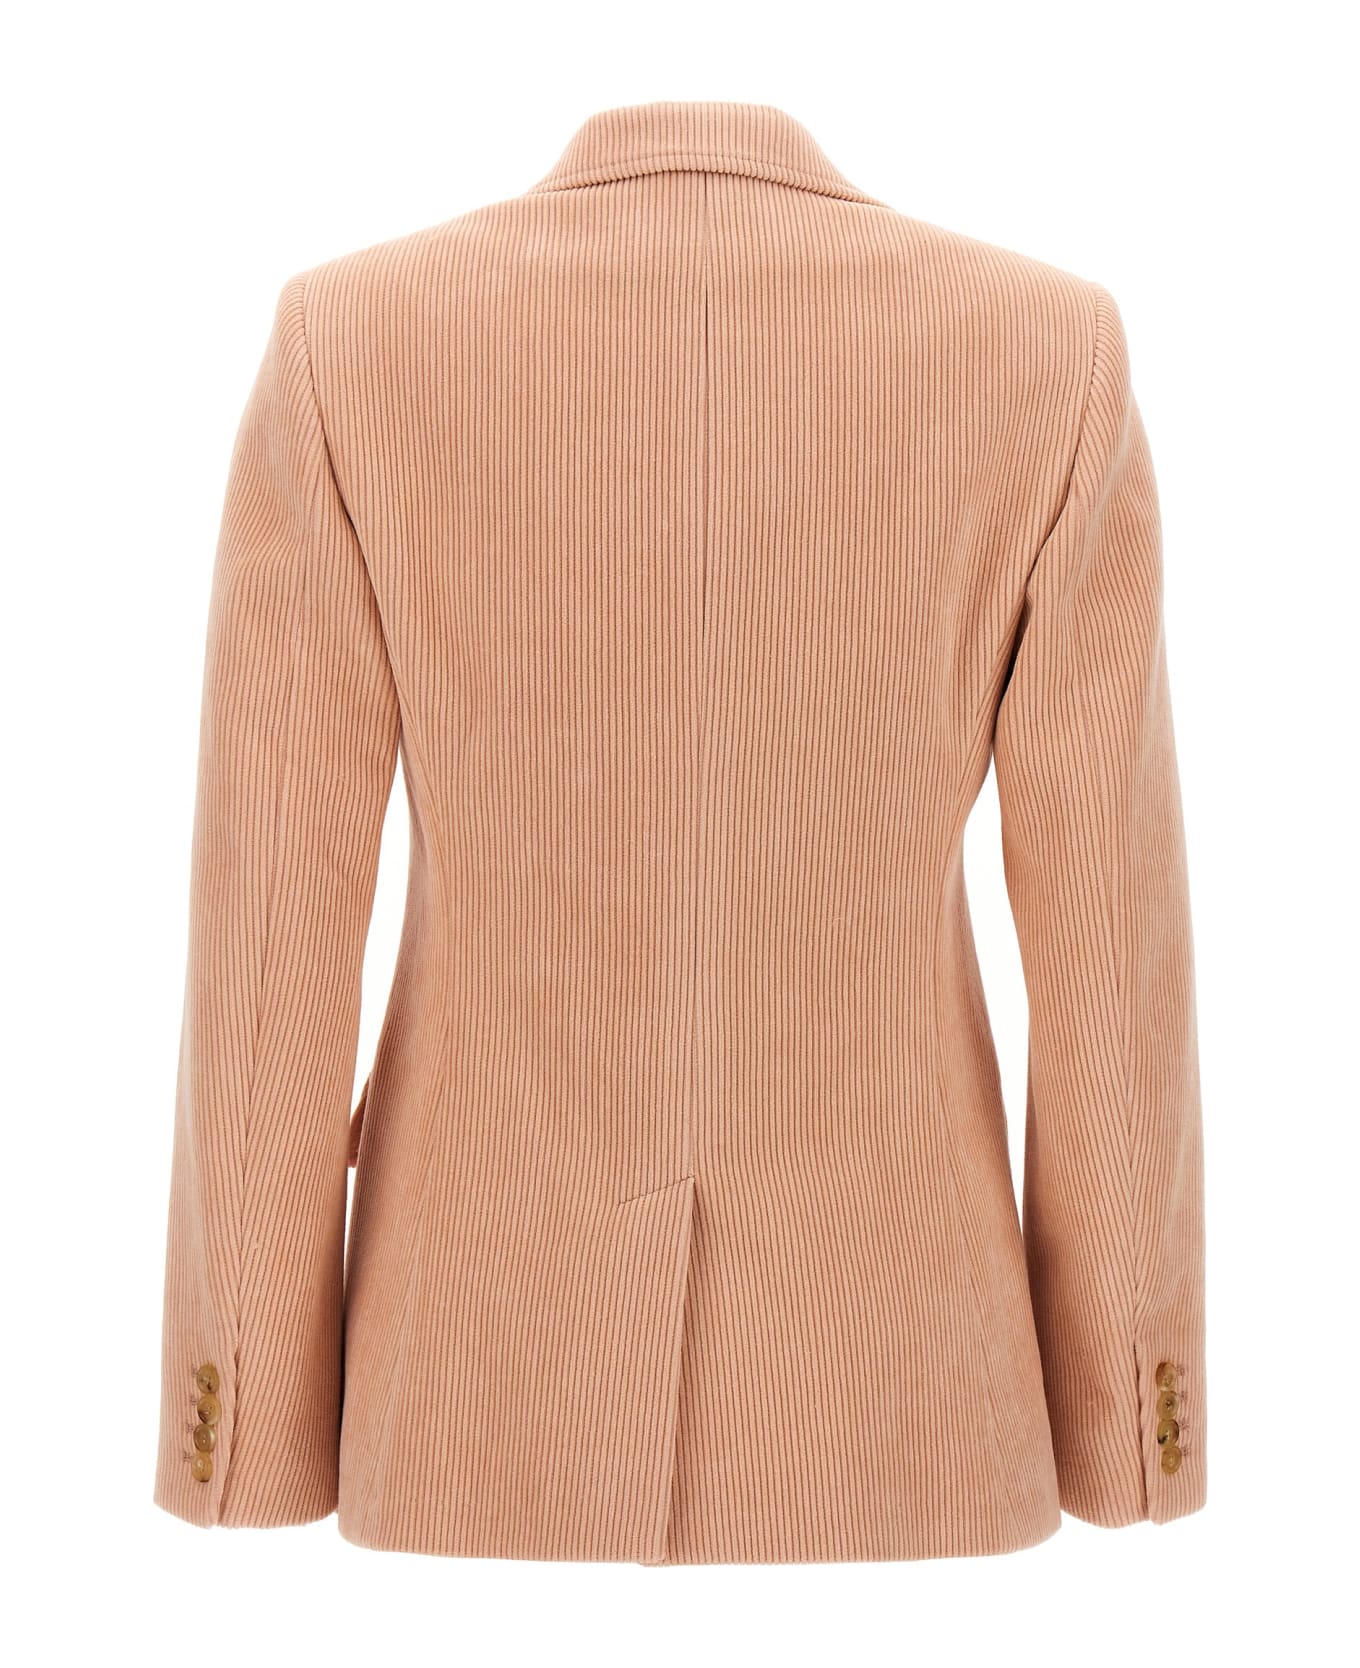 Chloé Single-breasted Cotton Jacket - MISTY PINK ブレザー